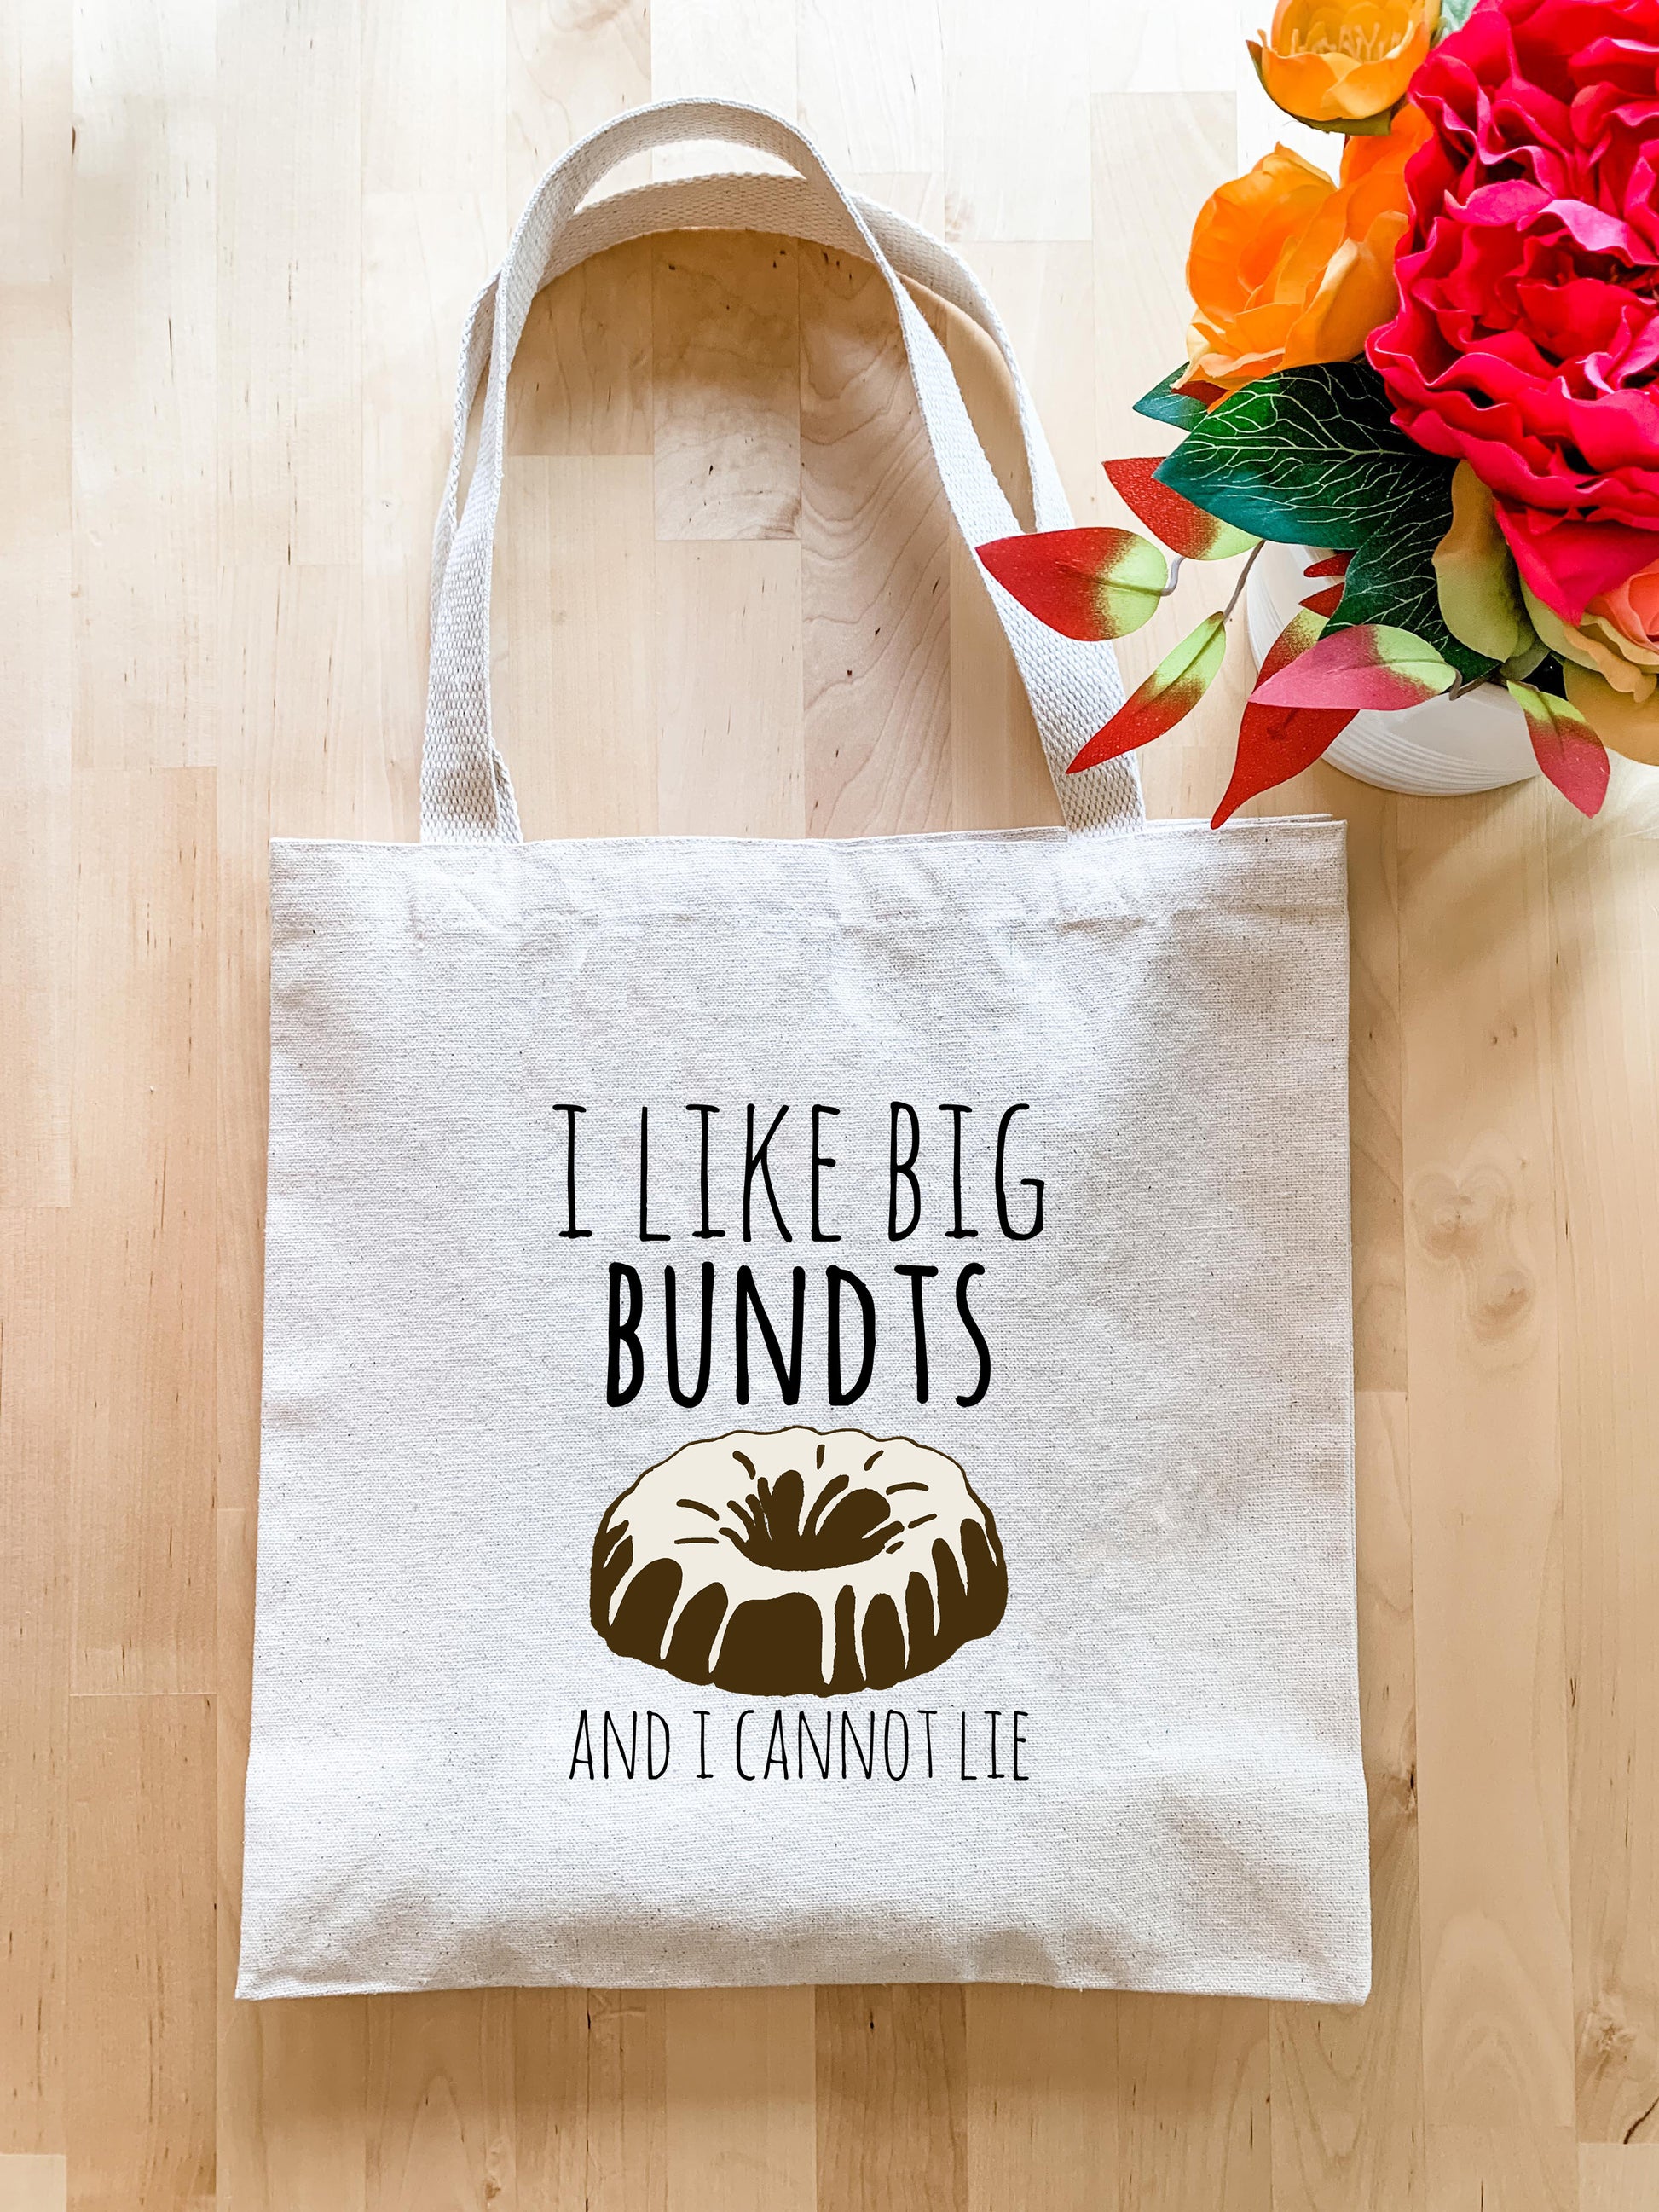 a bag with a bundt on it sitting next to a vase of flowers